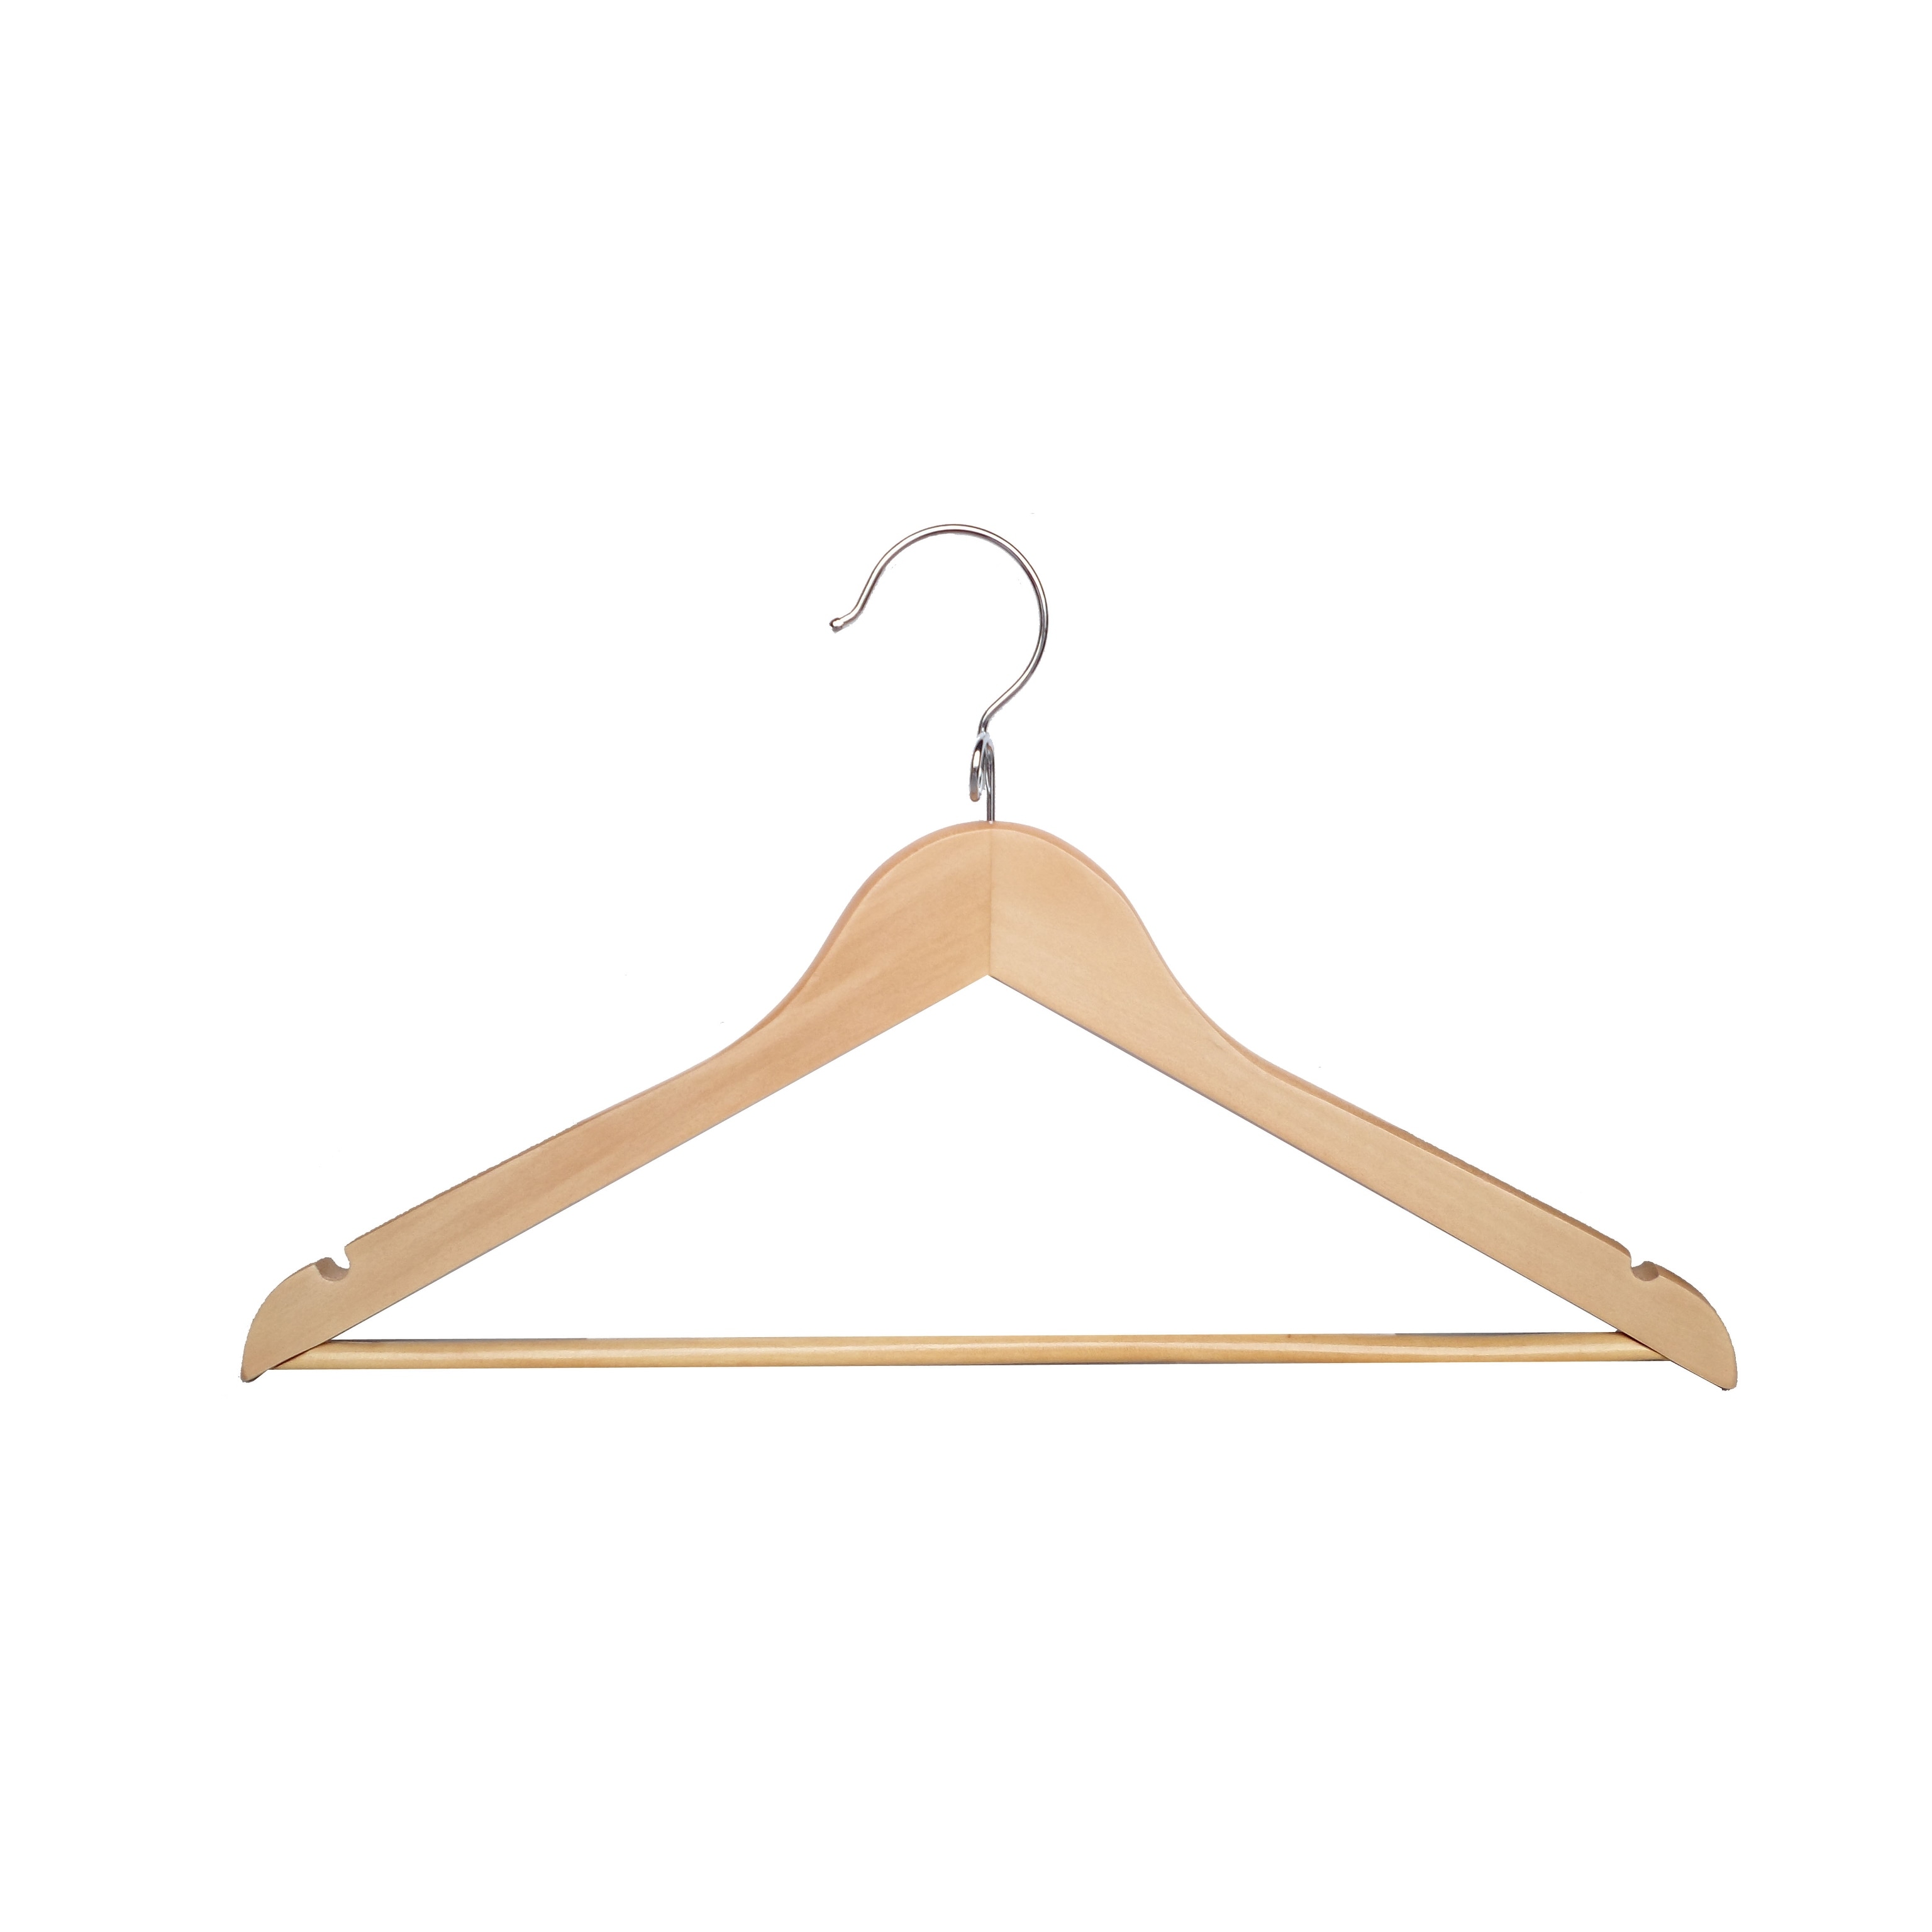 Proman Products 15 Kascade Wooden Hangers 50 Pack for Women and Kids  Clothing, Space Saving Pants Clothes Hanger - On Sale - Bed Bath & Beyond -  37826079